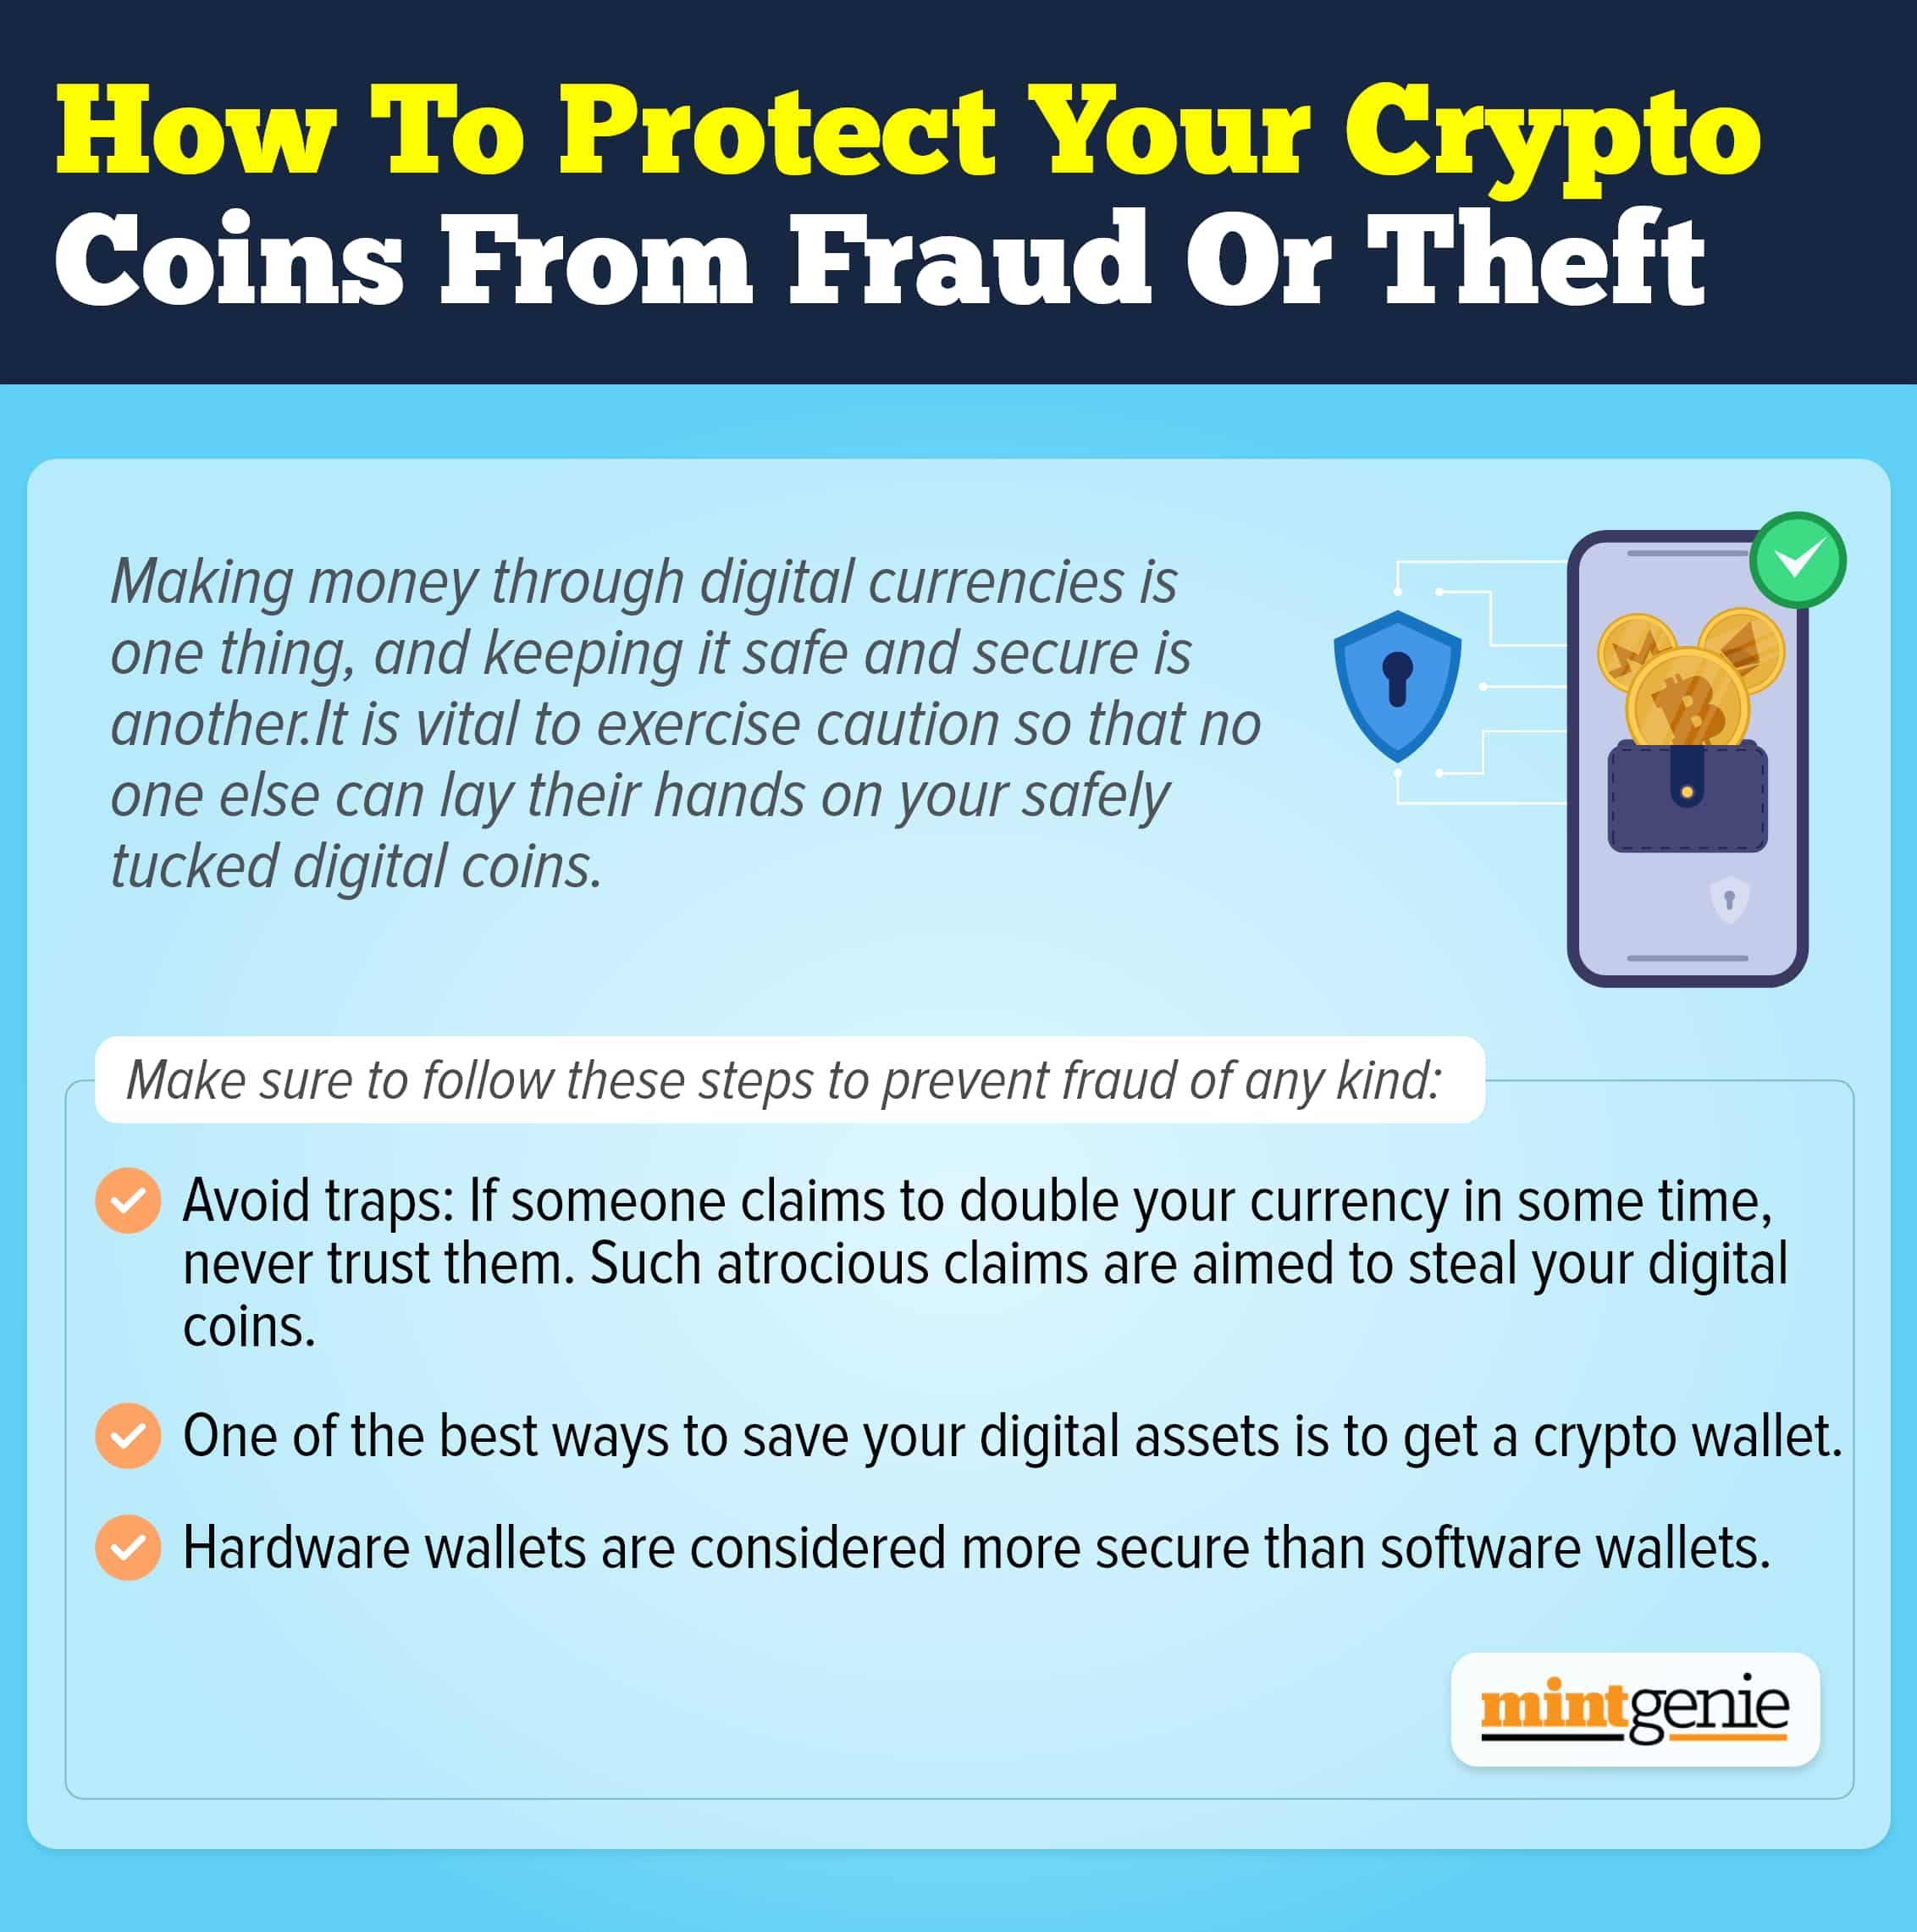 Protecting crypto coins from fraud or theft